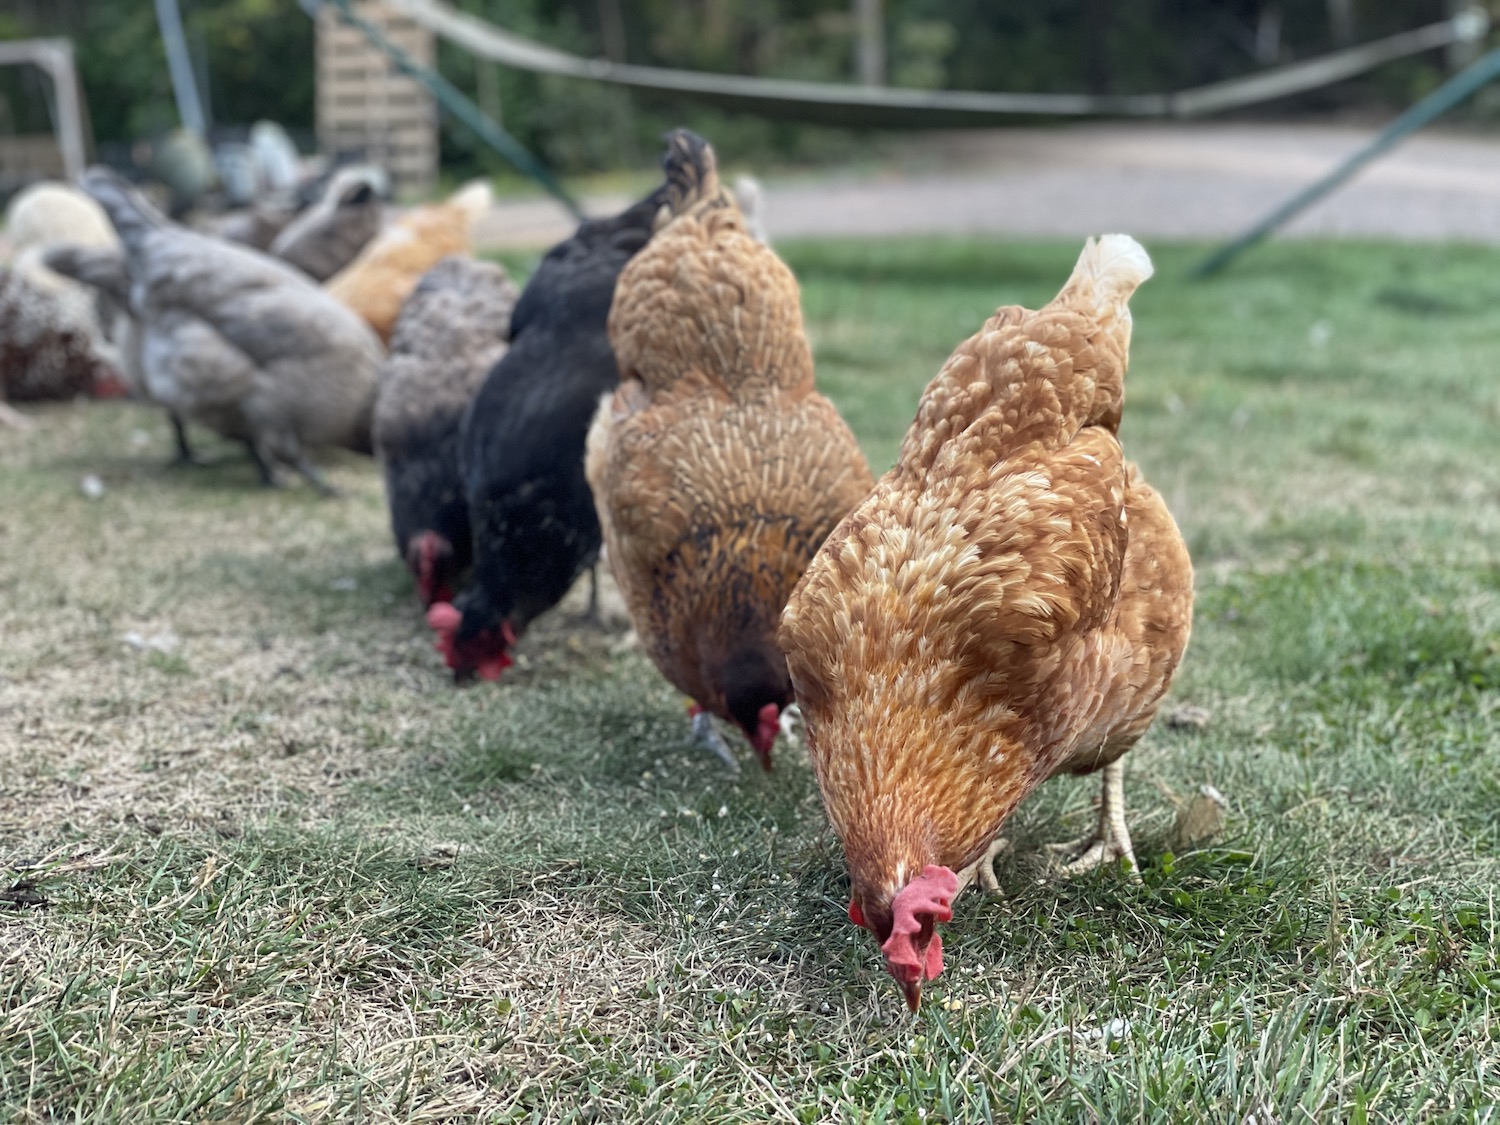 A photo of a flock of chickens out foraging